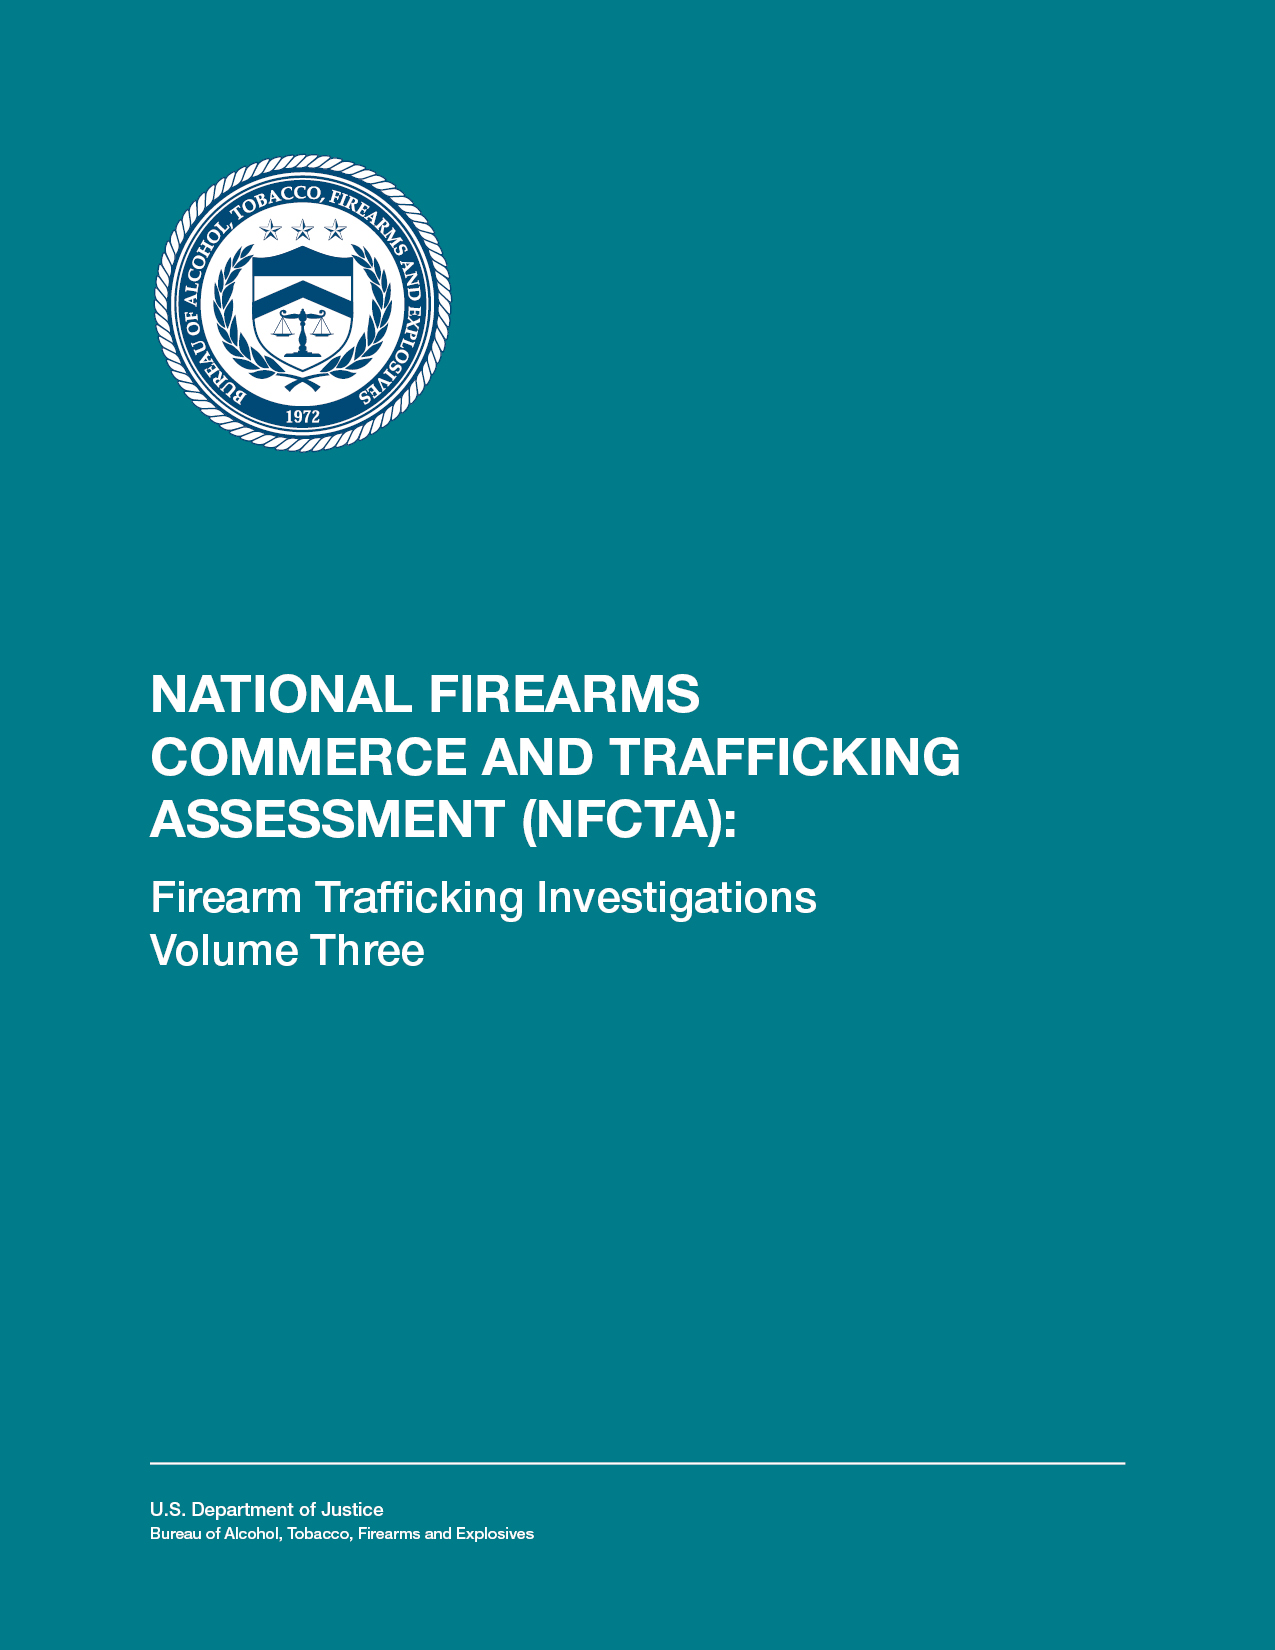 Cover of the National Firearms Commerce and Trafficking Assessment (NFCTA): Crime Guns - Volume III